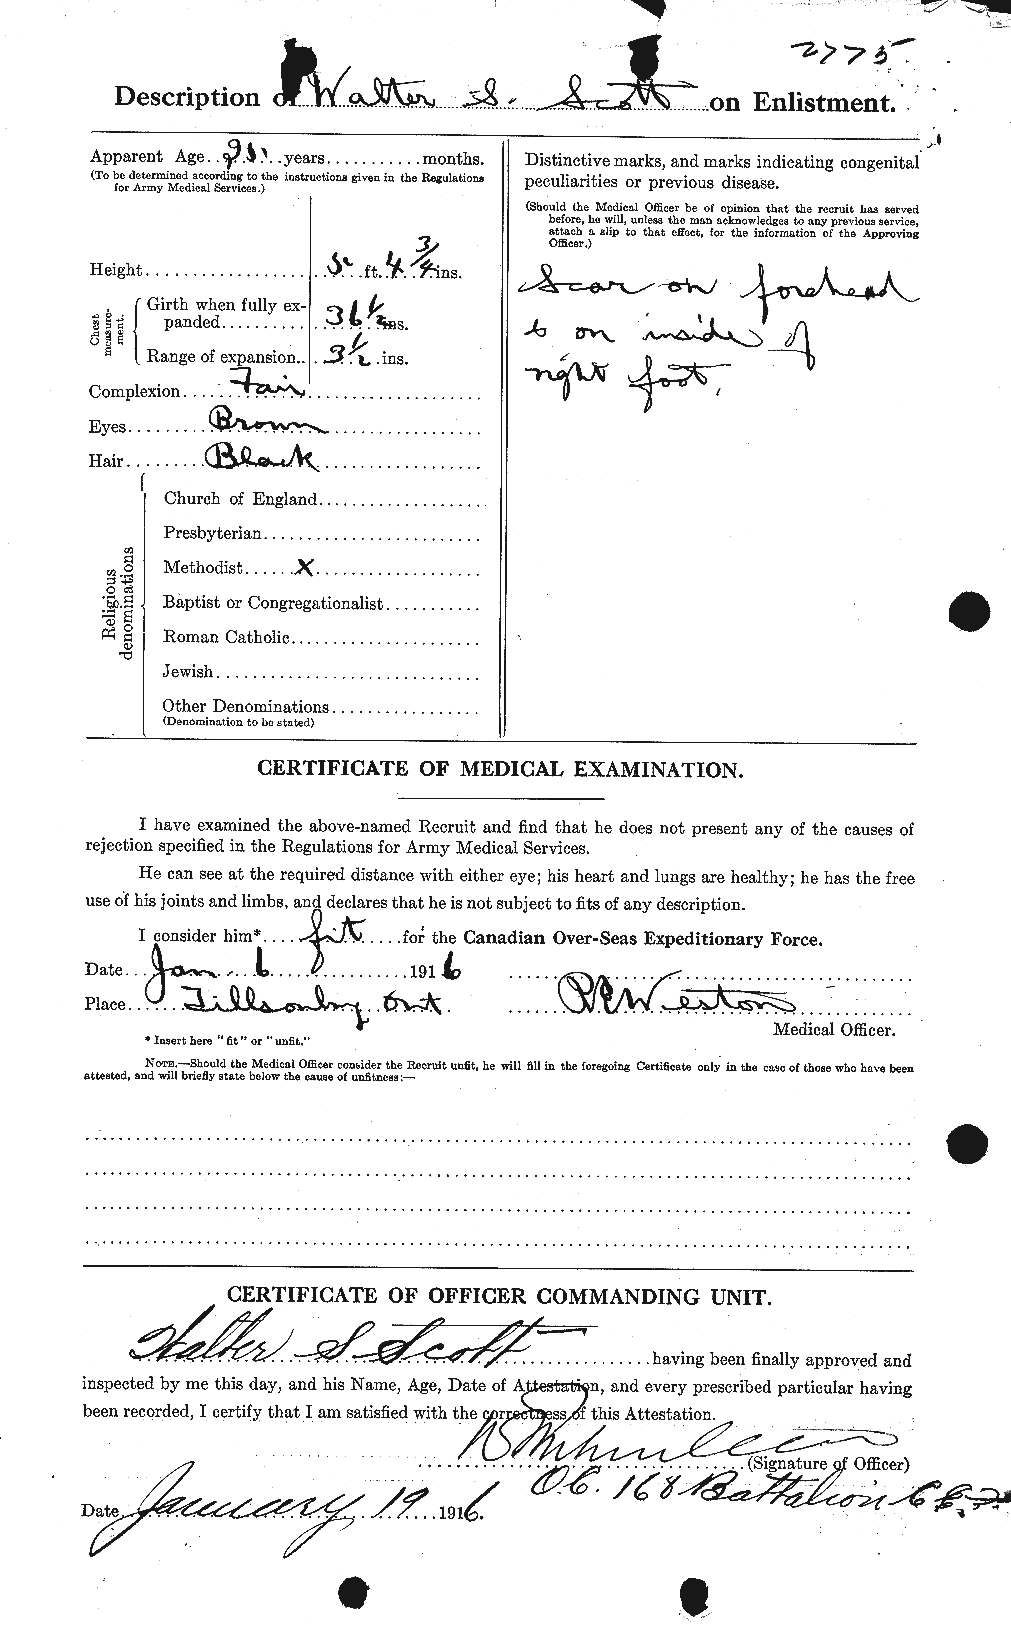 Personnel Records of the First World War - CEF 087690b